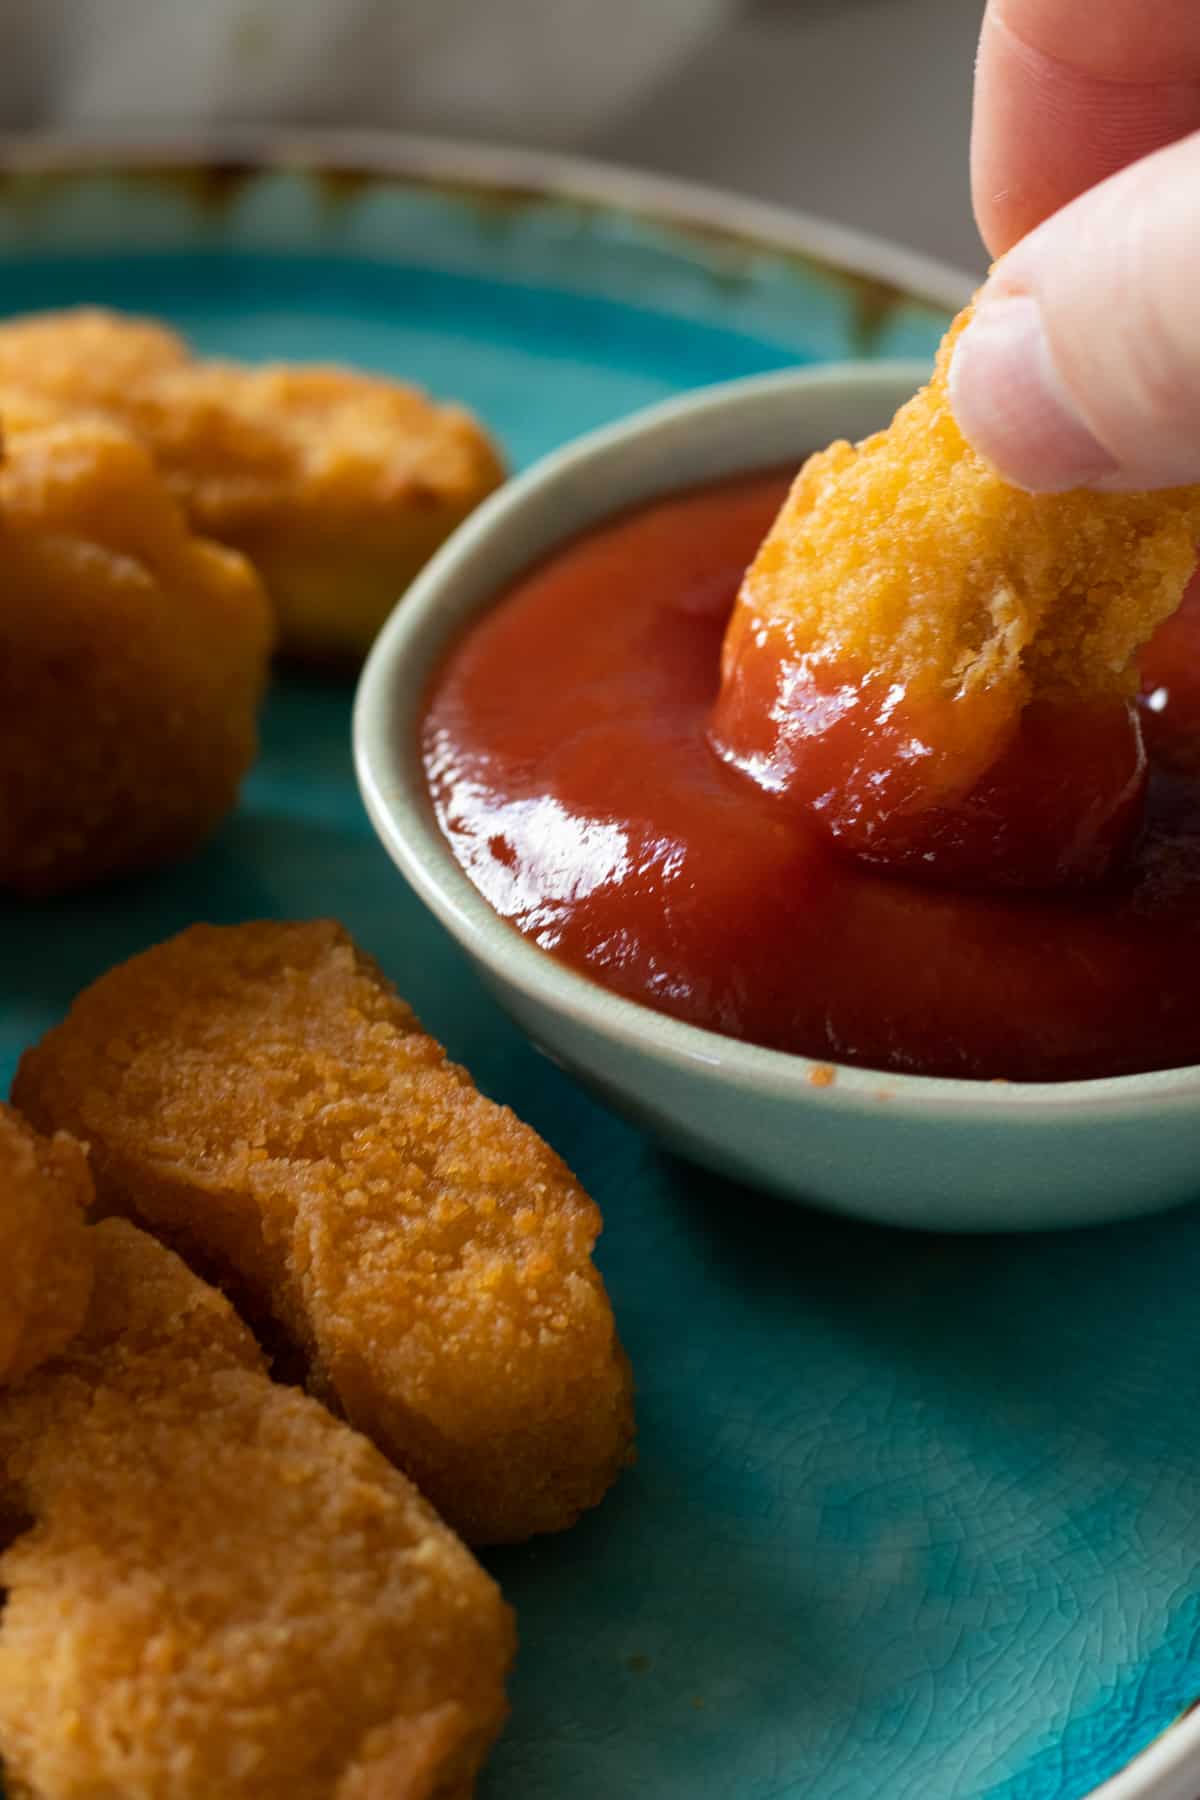 a chicken nugget being dipped in ketchup